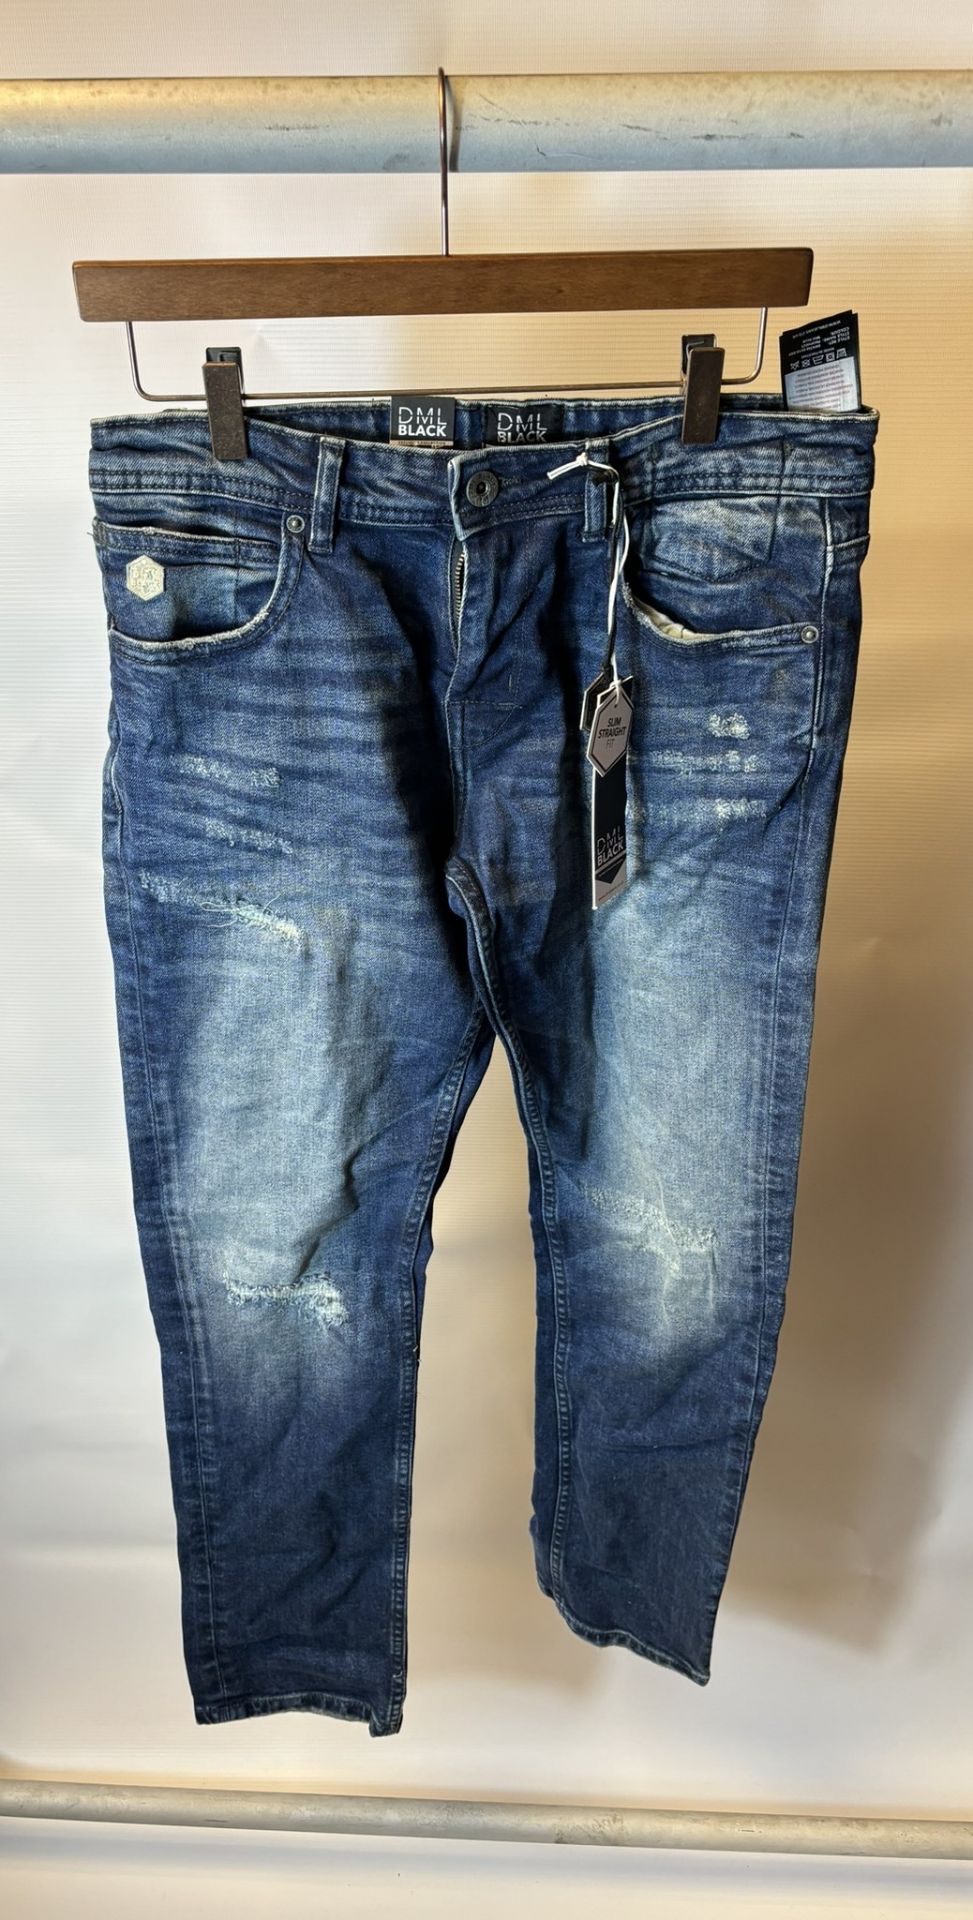 13 x Pairs Of various Sized DML Jeans Prophecy & Voyage Blue Jeans - Image 25 of 39